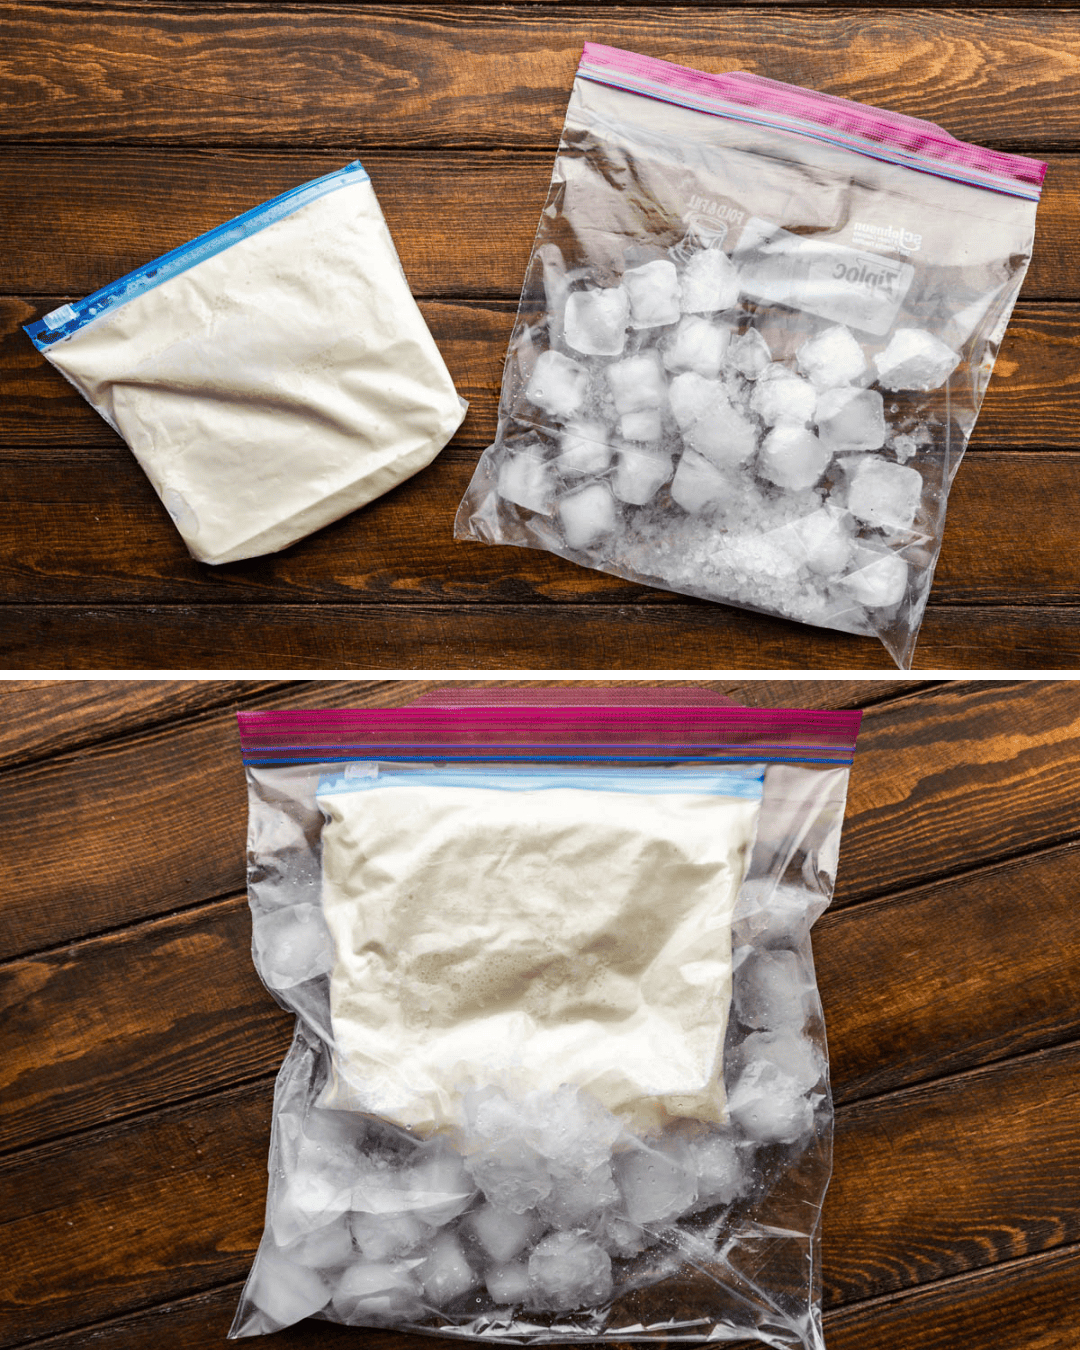 Photos of the process of making 5-minute ice cream showing the bag of ice cream inside the bag of ice.